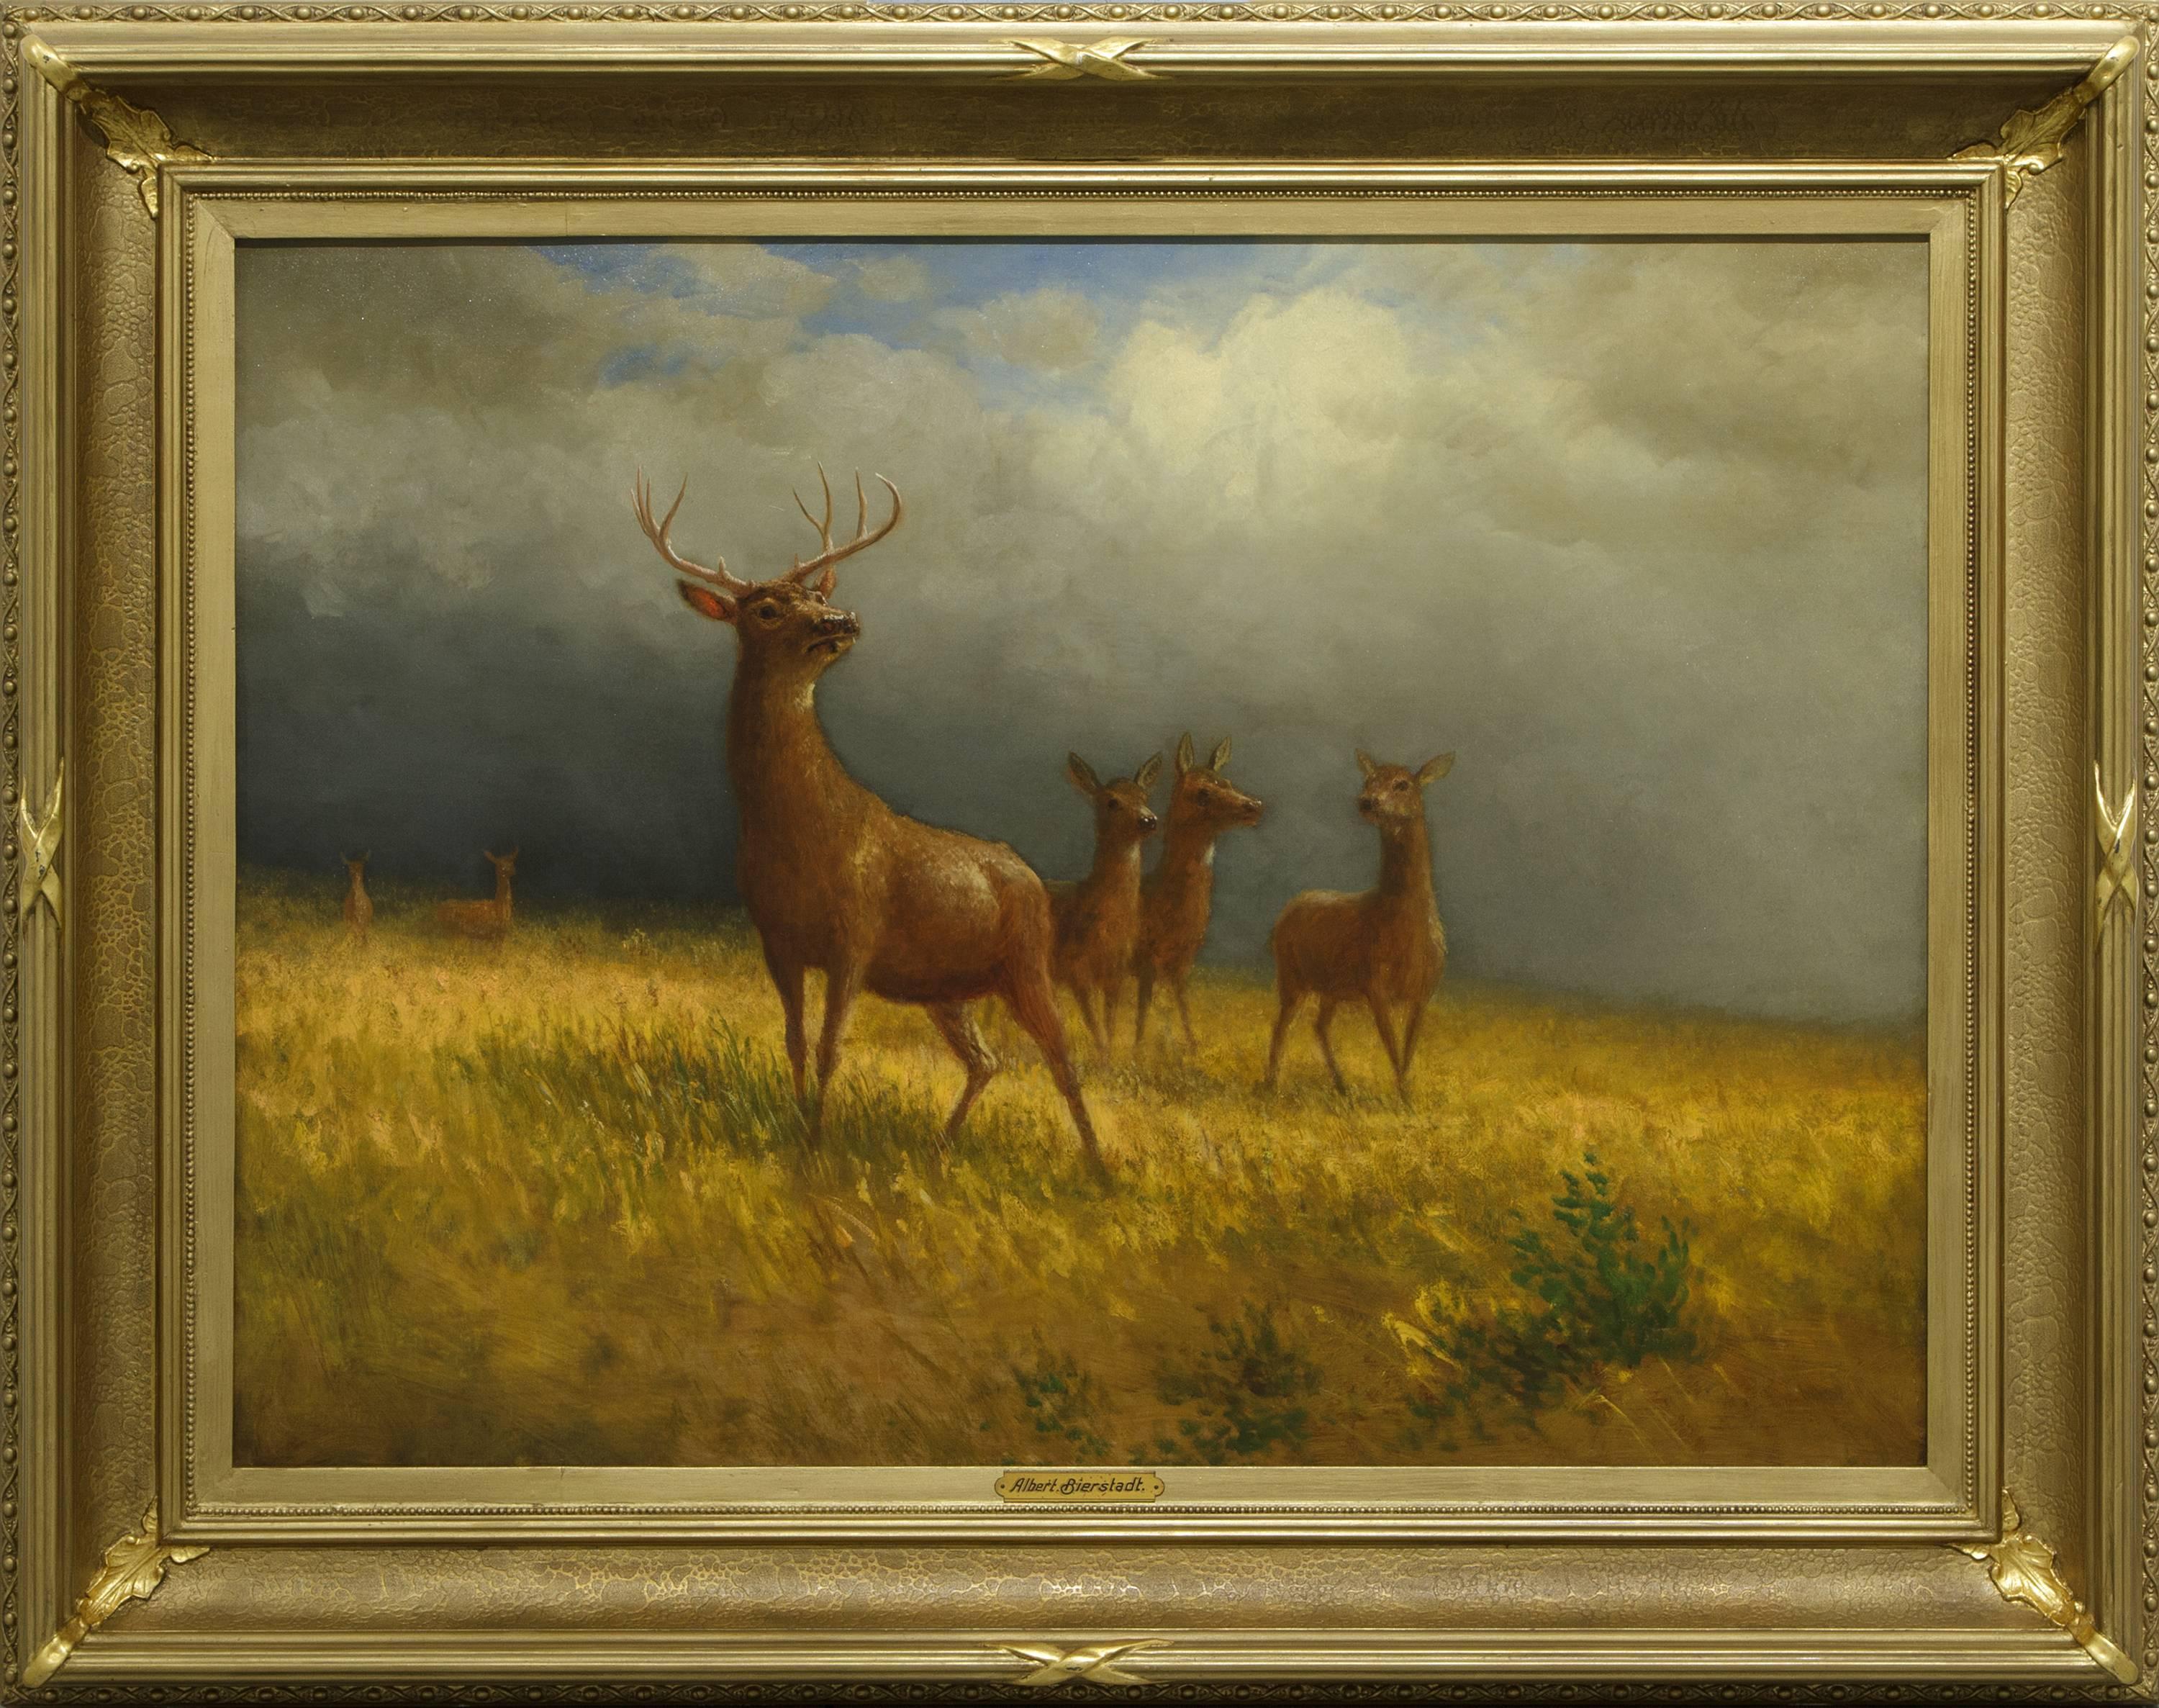 Three Deer and a Stag (Monarch of the Plains) - American Realist Painting by Albert Bierstadt